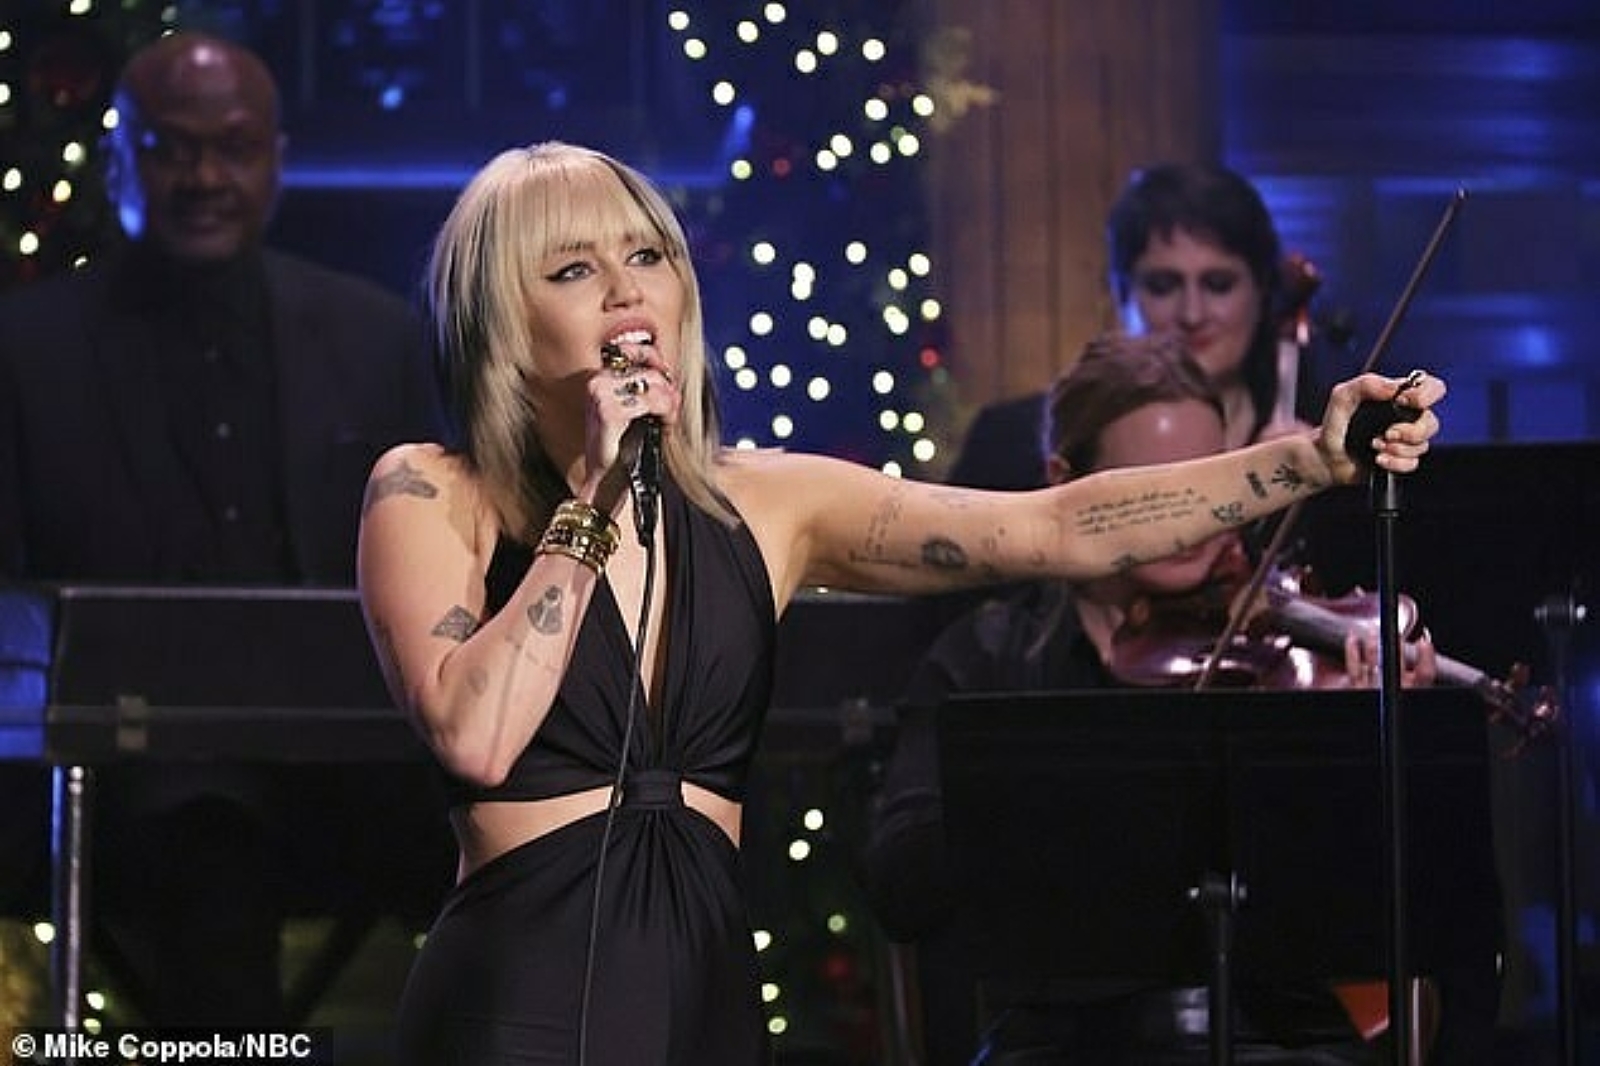 Watch Miley Cyrus cover Yvonne Fair's 'It Should Have Been Me'